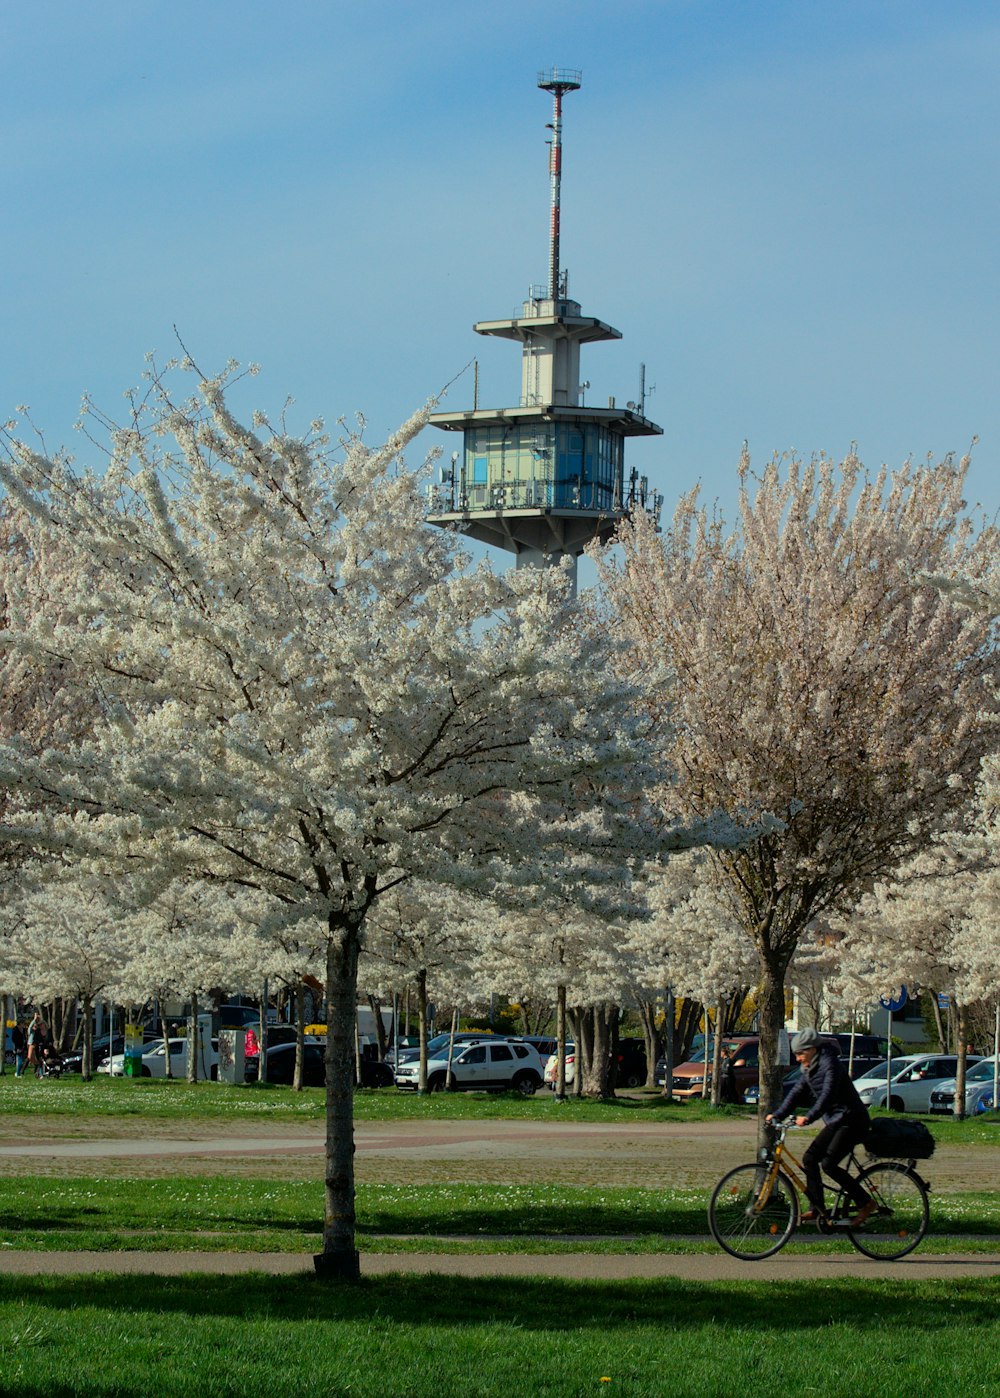 a person riding a bike in a park with a tower in the background